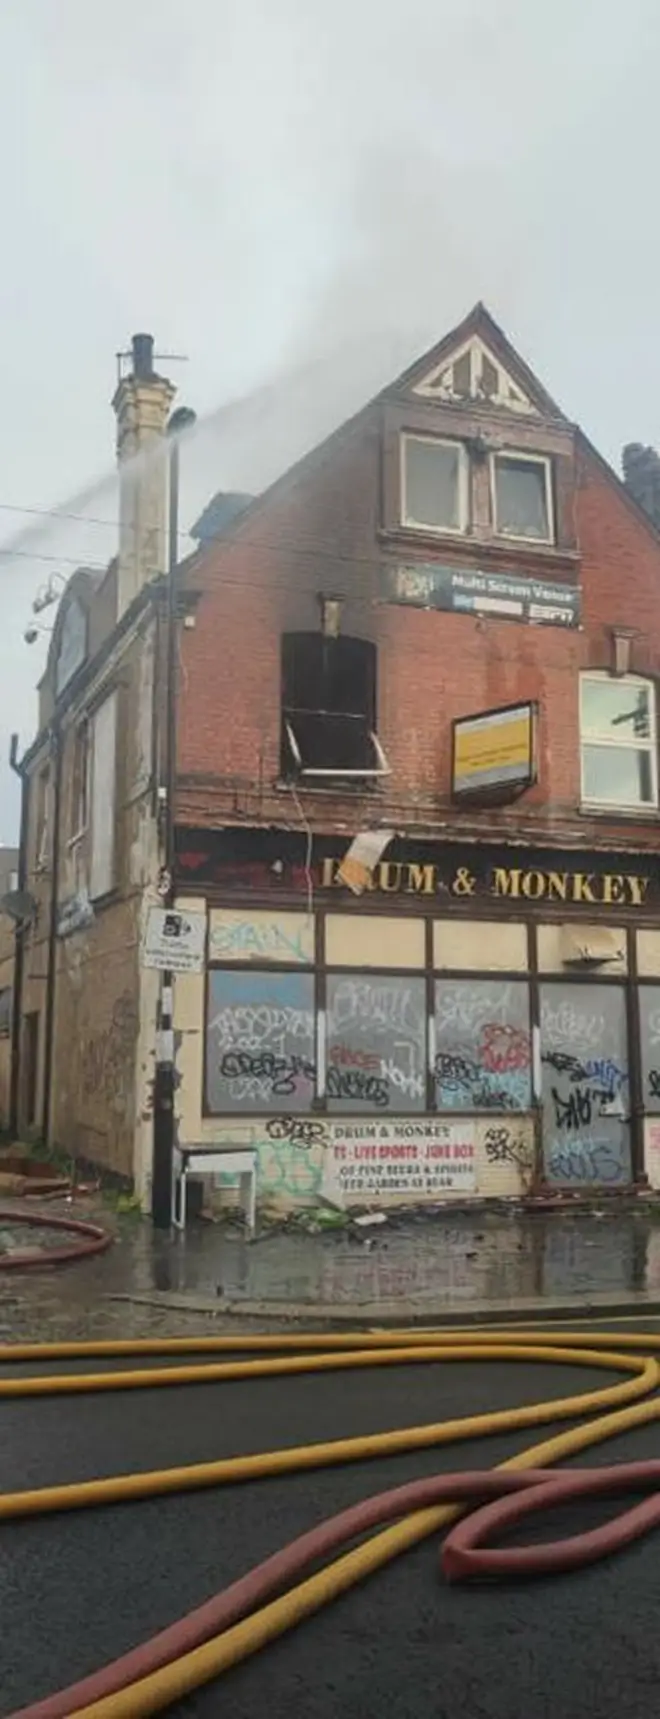 Firefighters responded to the blaze at the Drum and Monkey